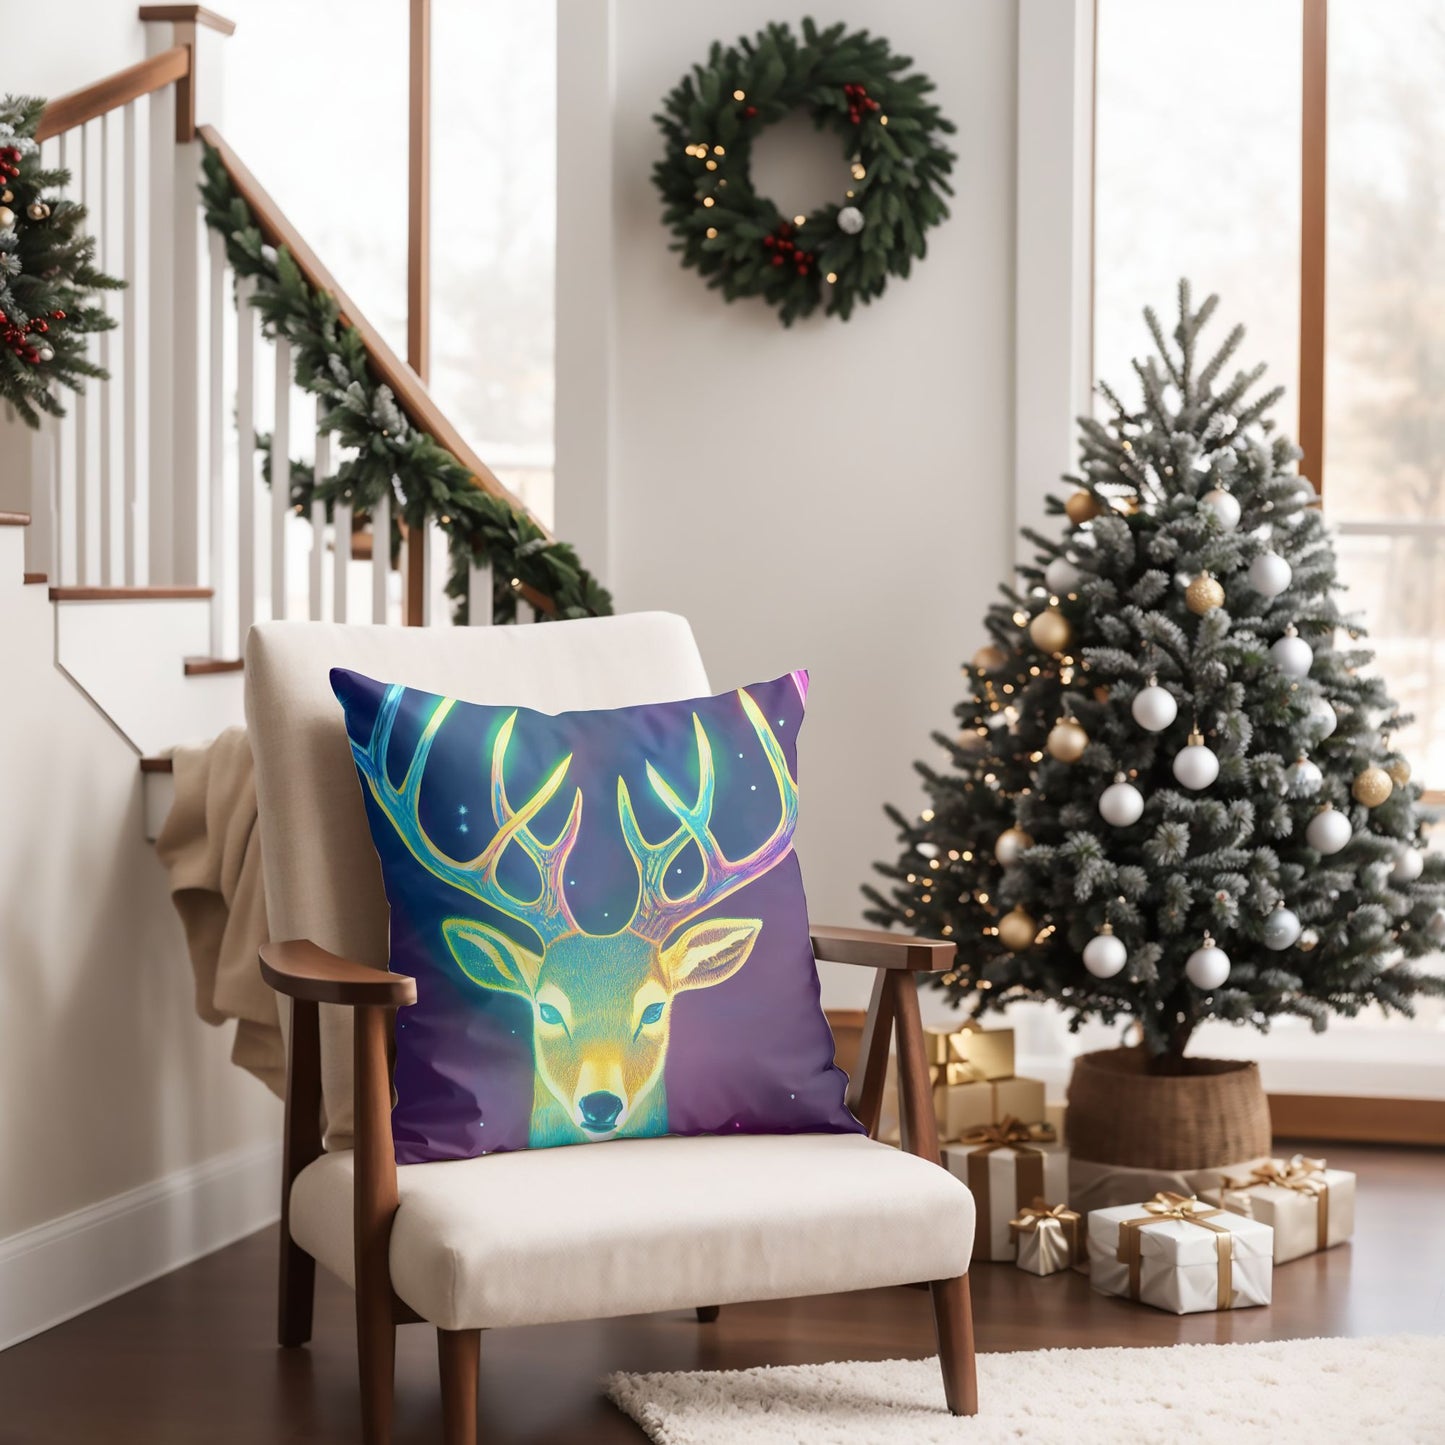 Decorative Christmas Reindeer Cushion Cover in Various Colors